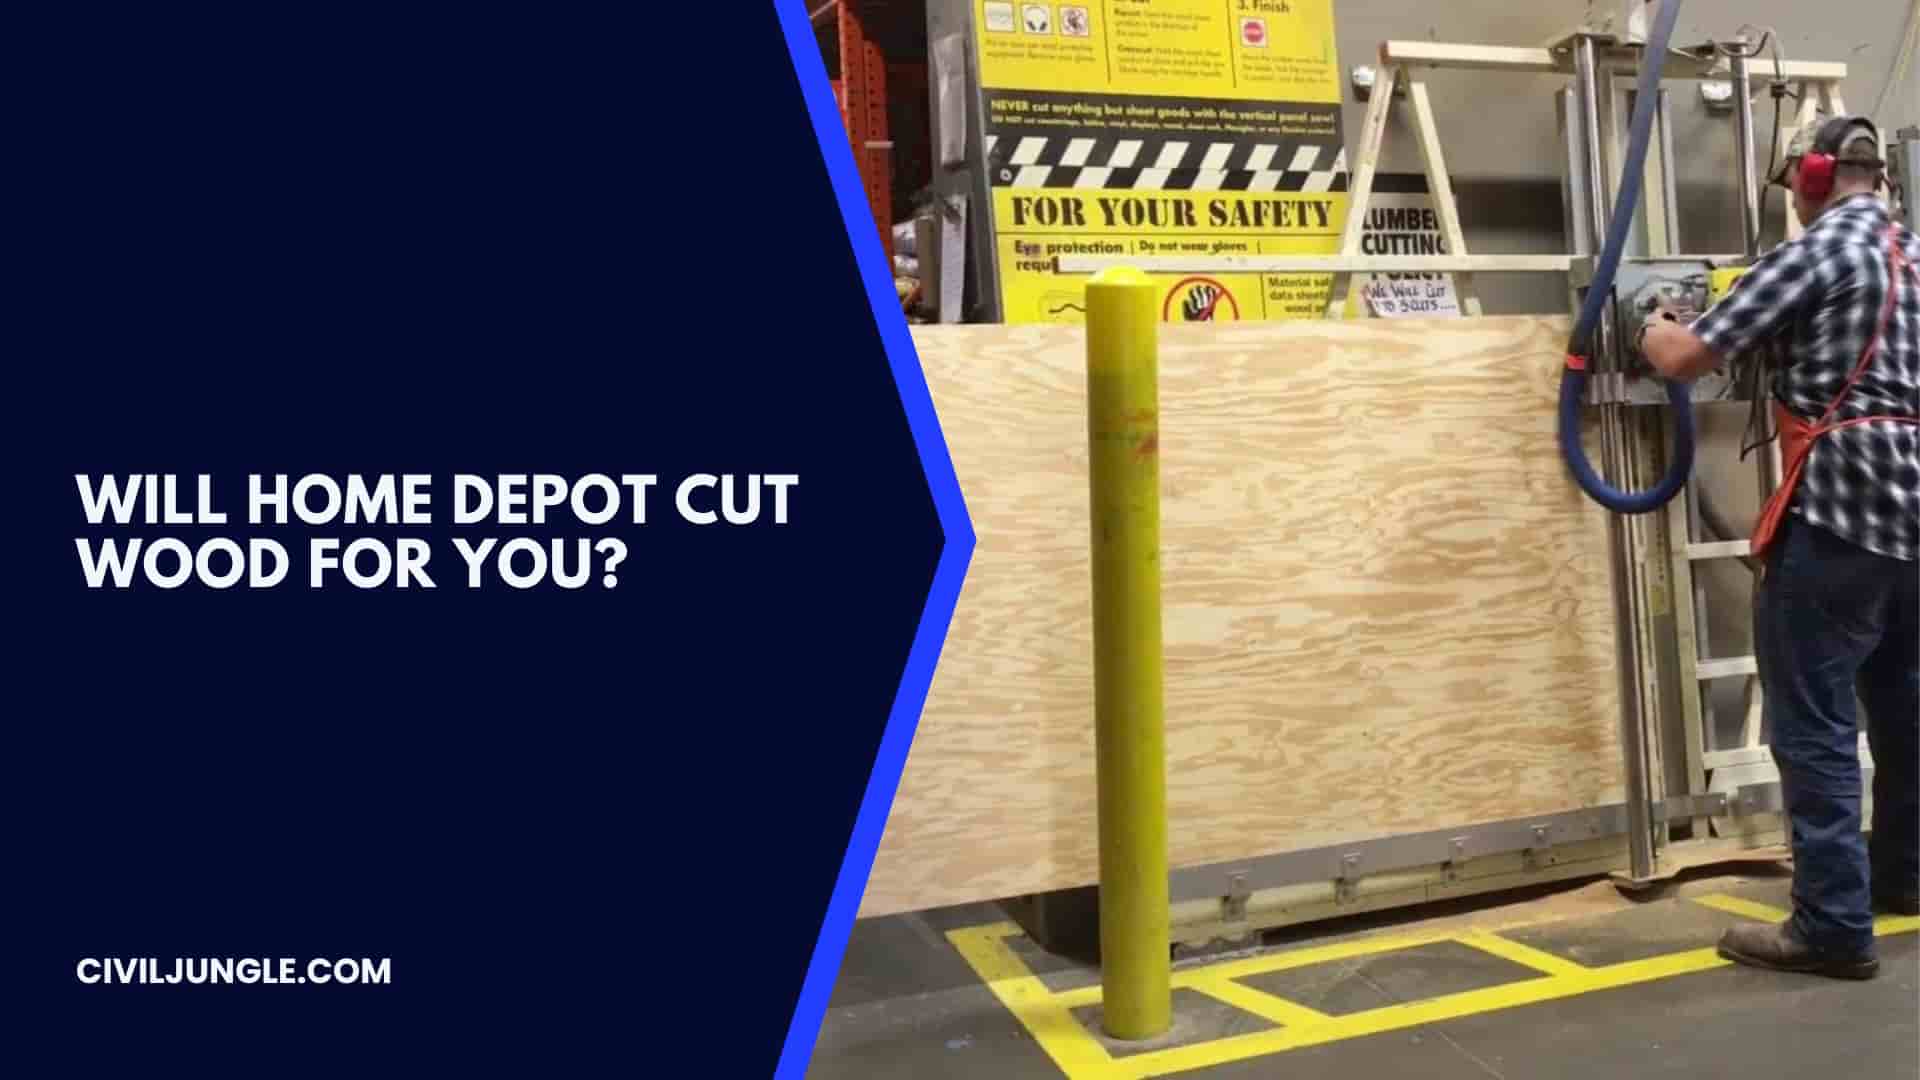 Will Home Depot Cut Wood For You?